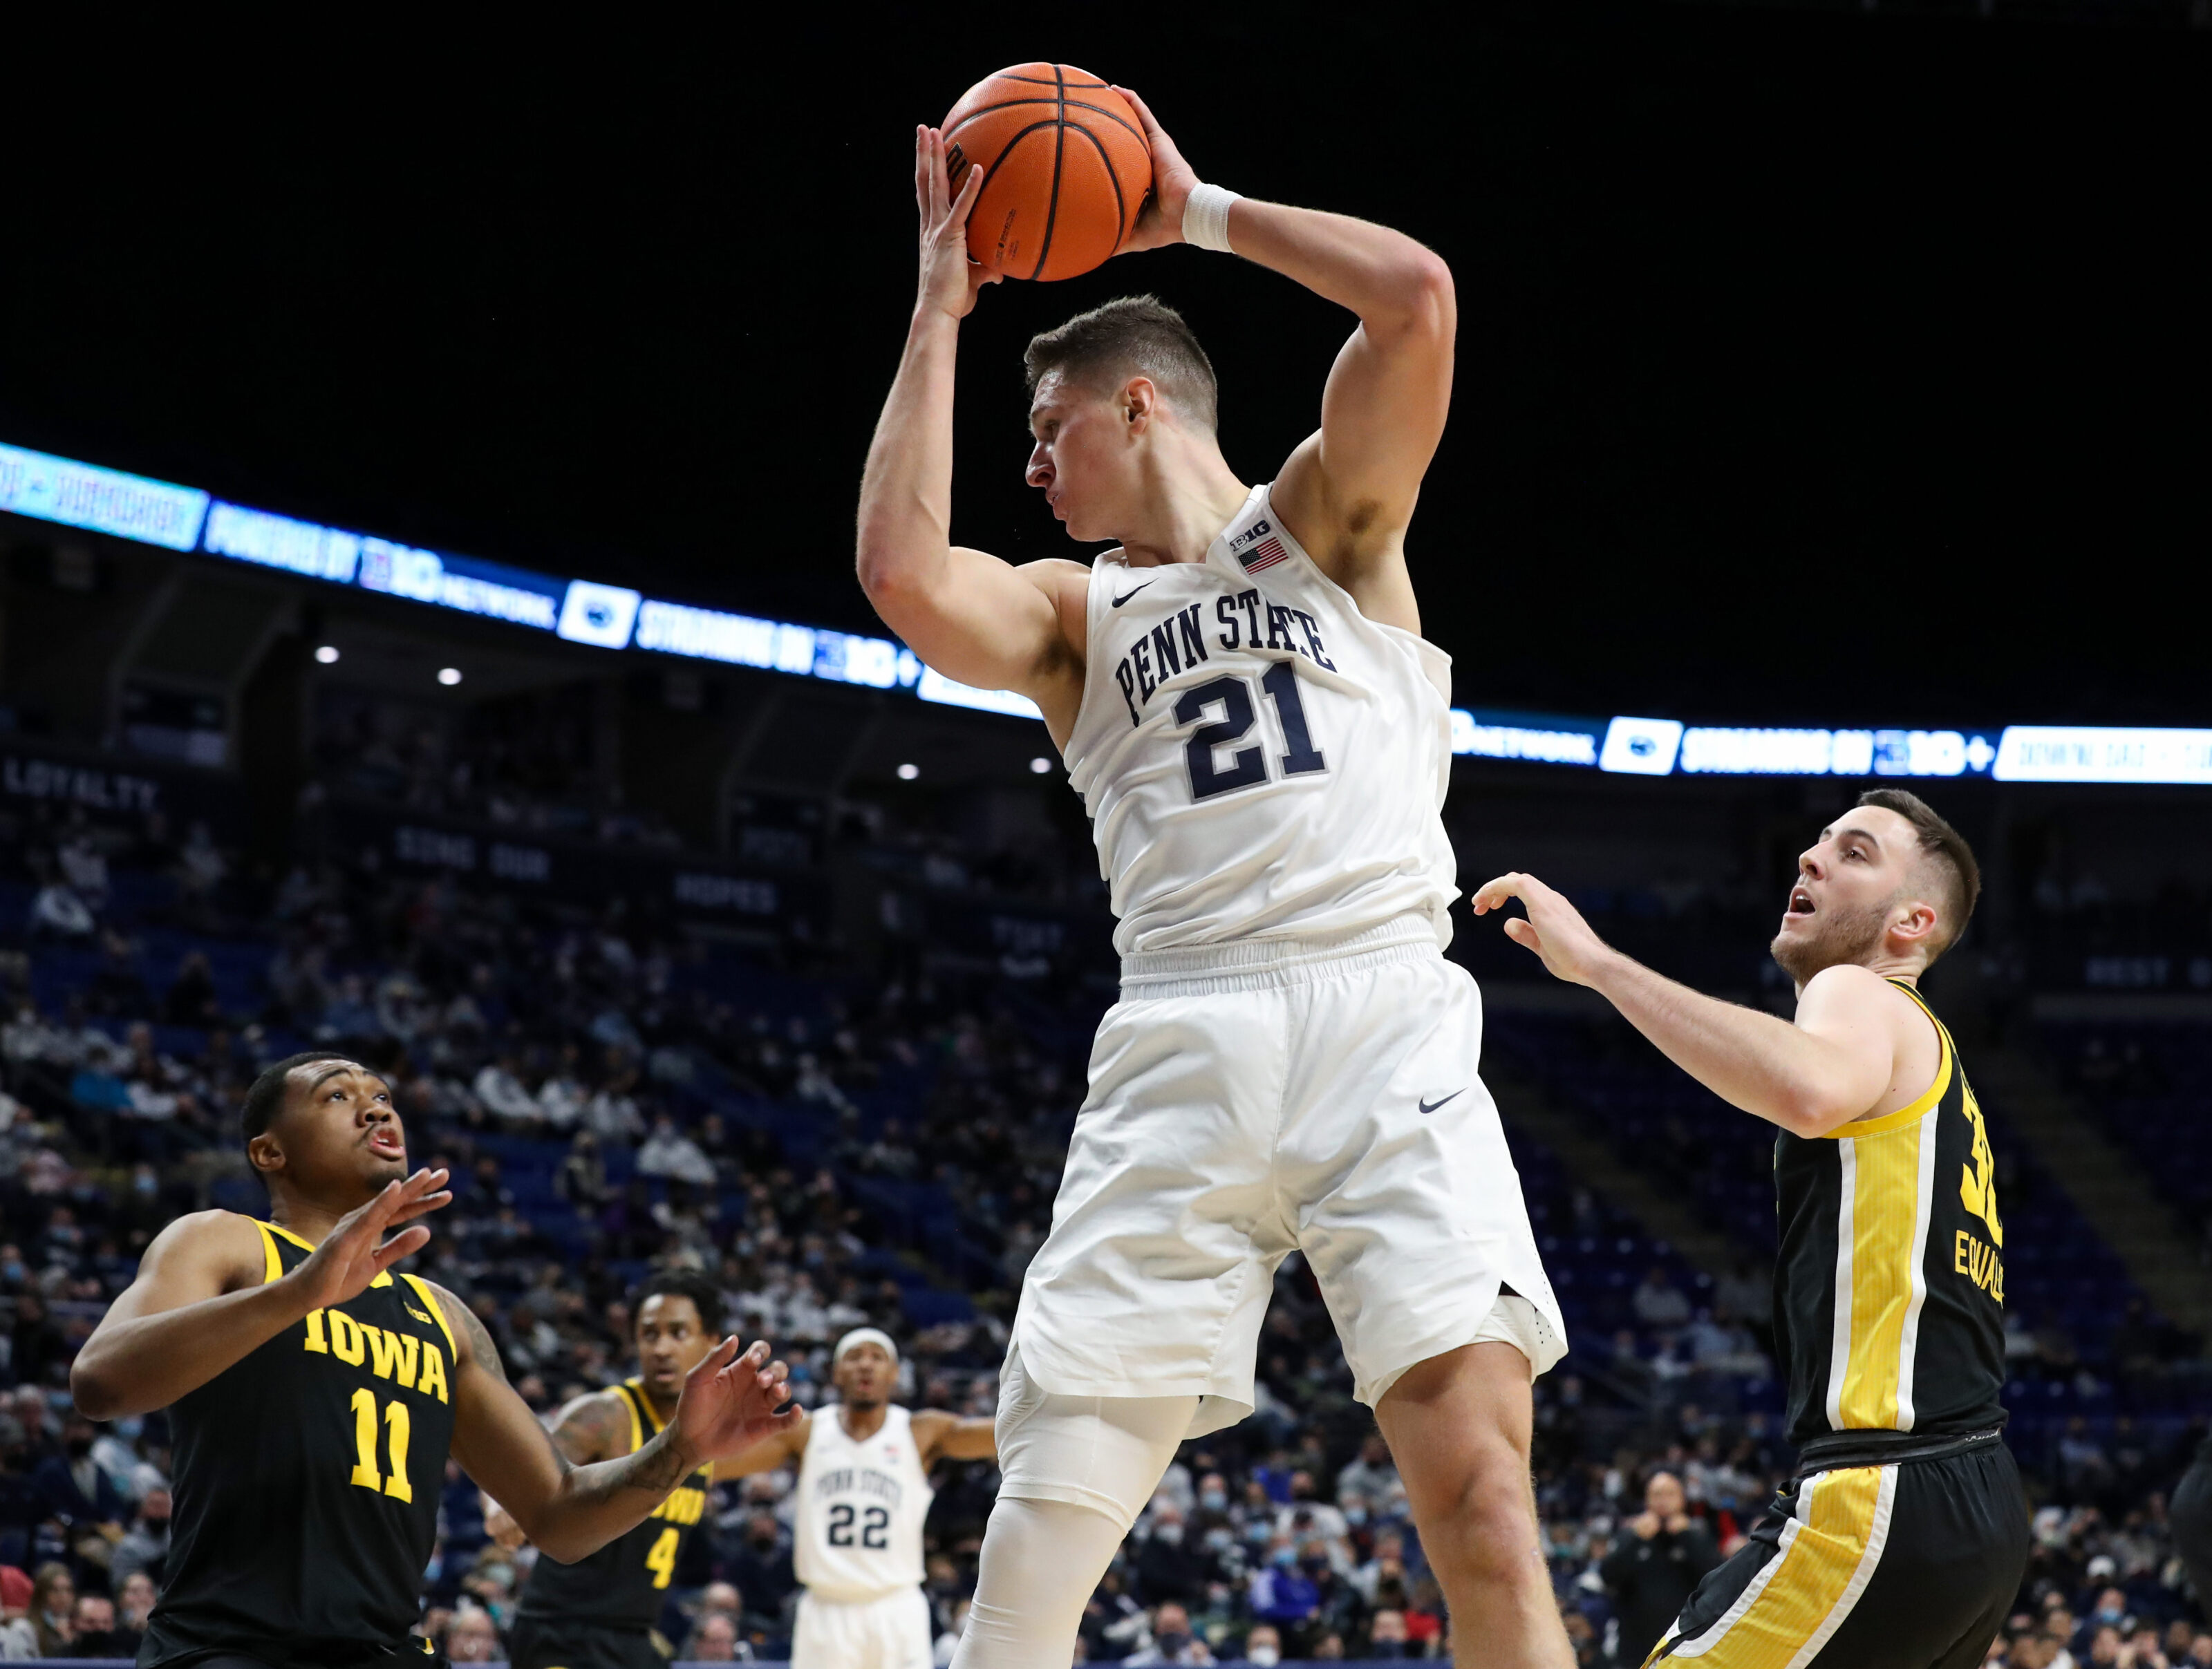 Wisconsin Game Today Wisconsin vs Penn State, Predictions, Odds, TV Channel and Live Stream for Basketball Game Feb